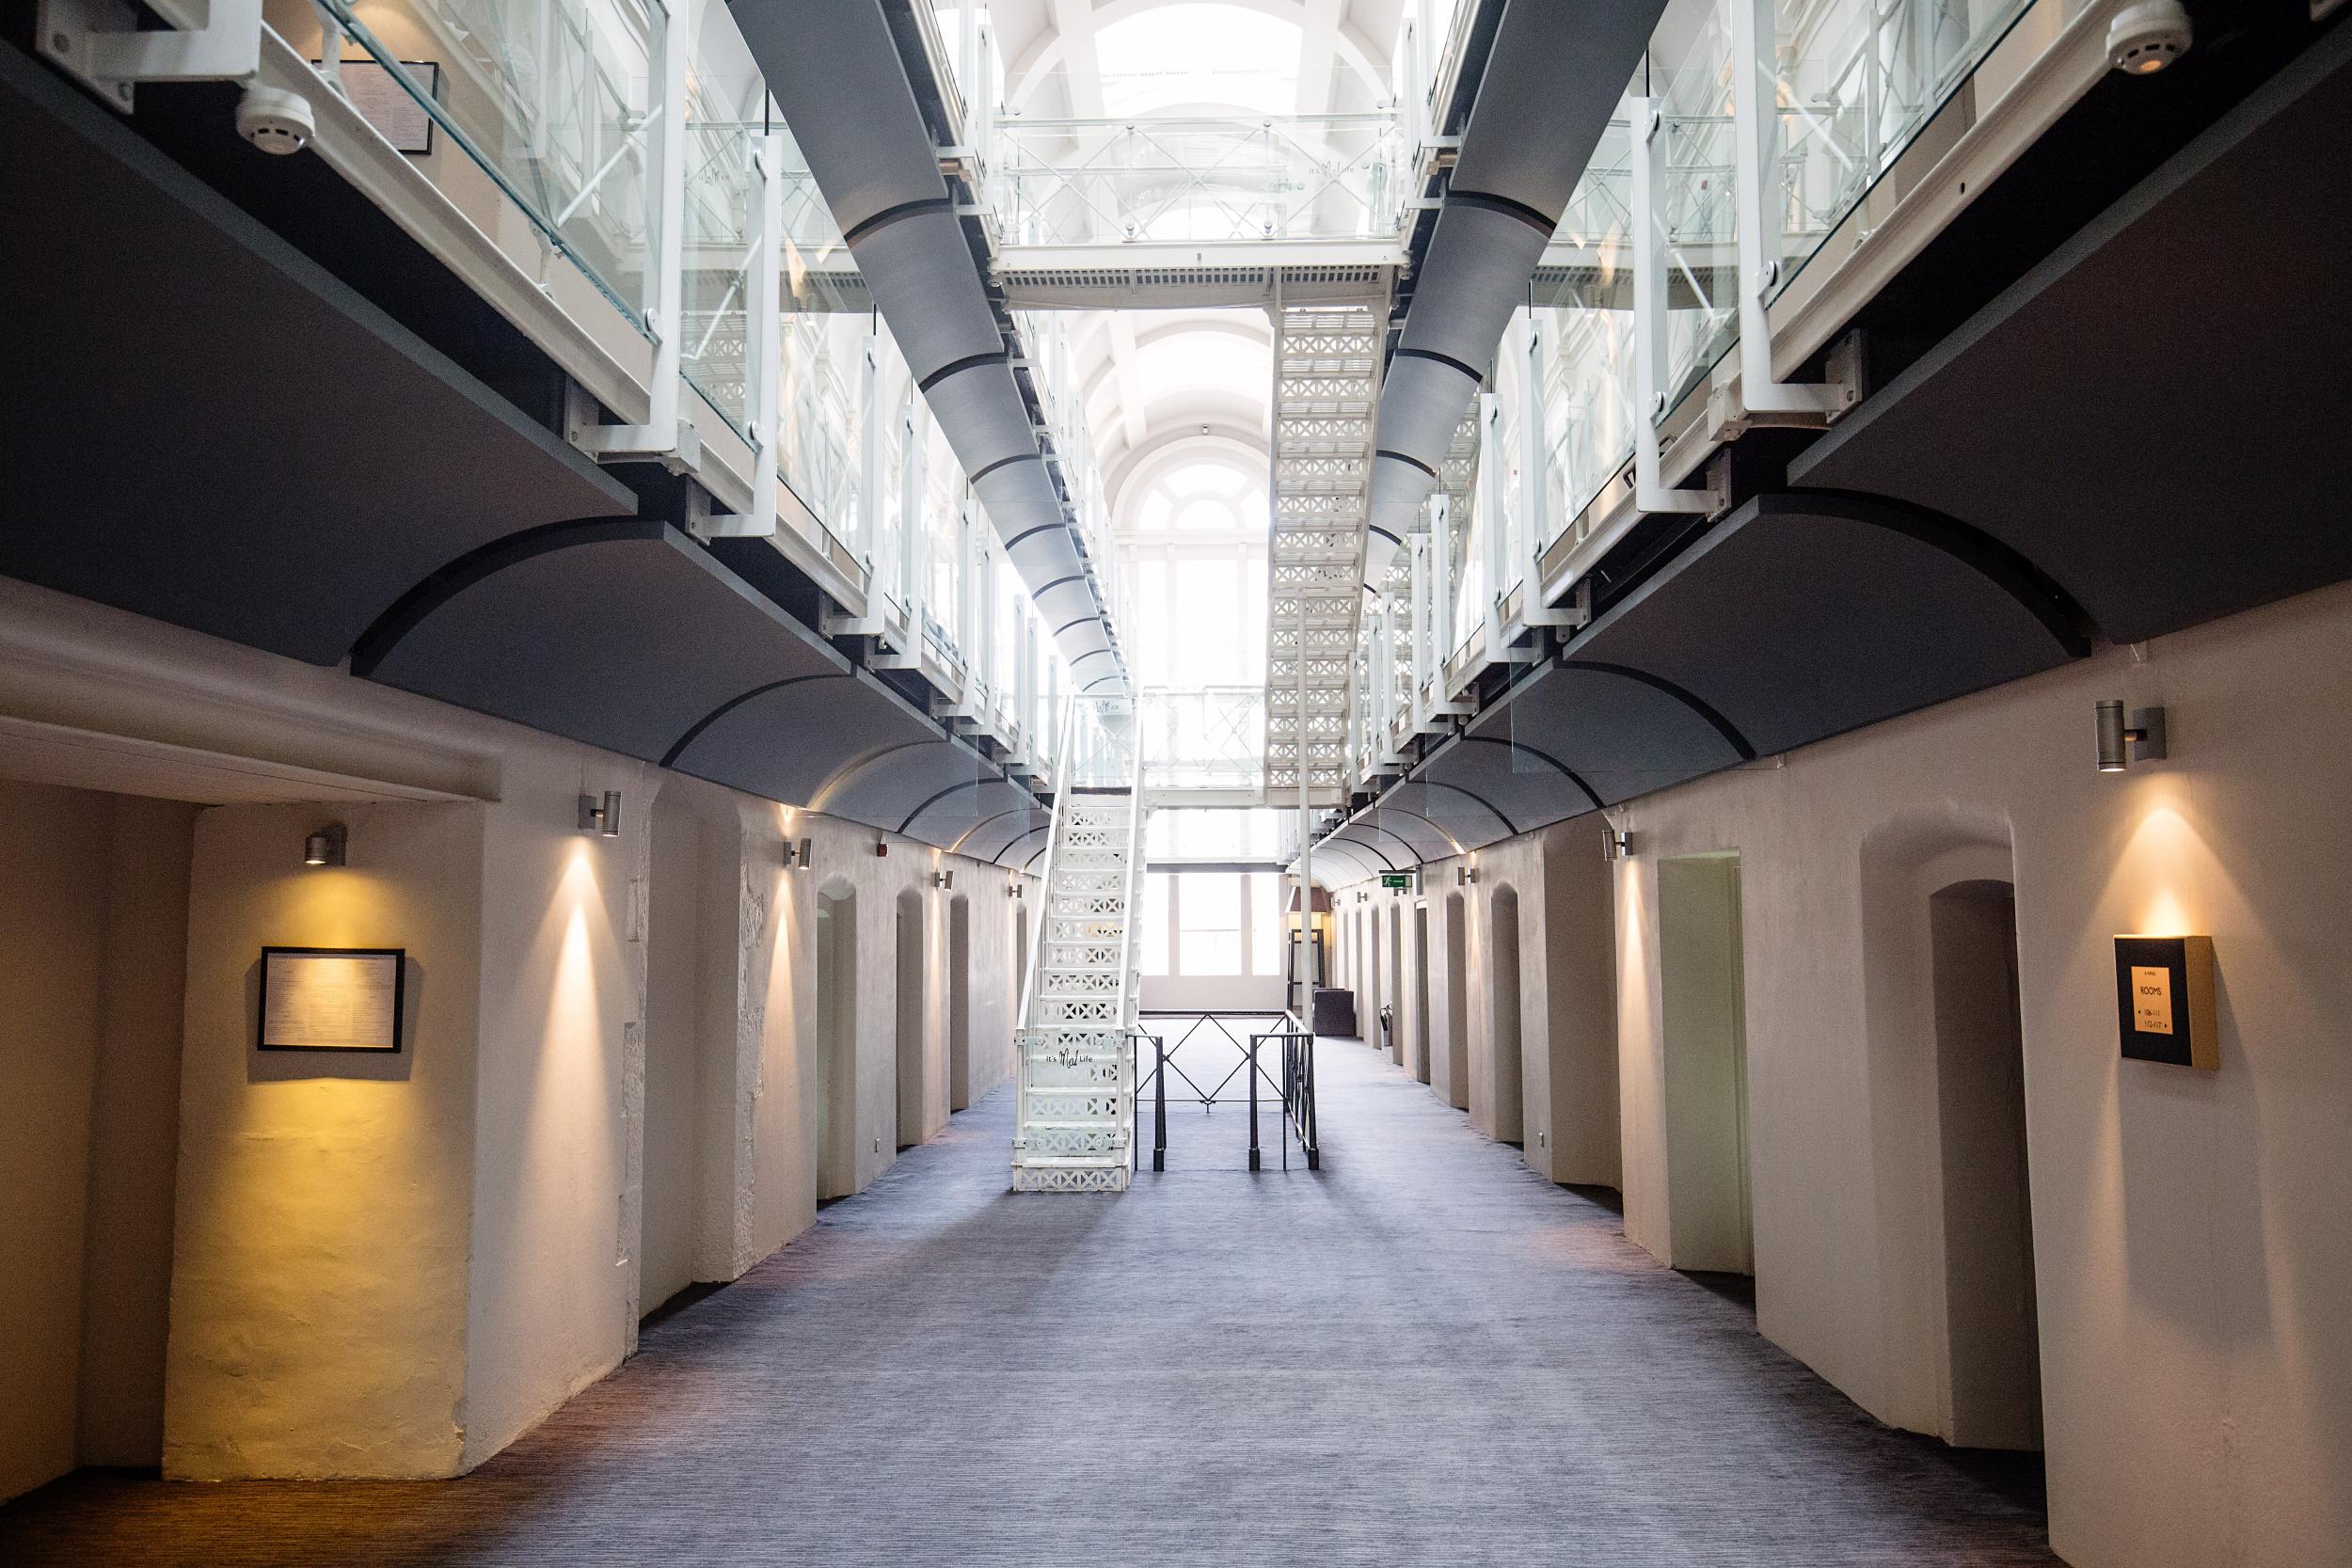 Stay in a former prison at Malmaison